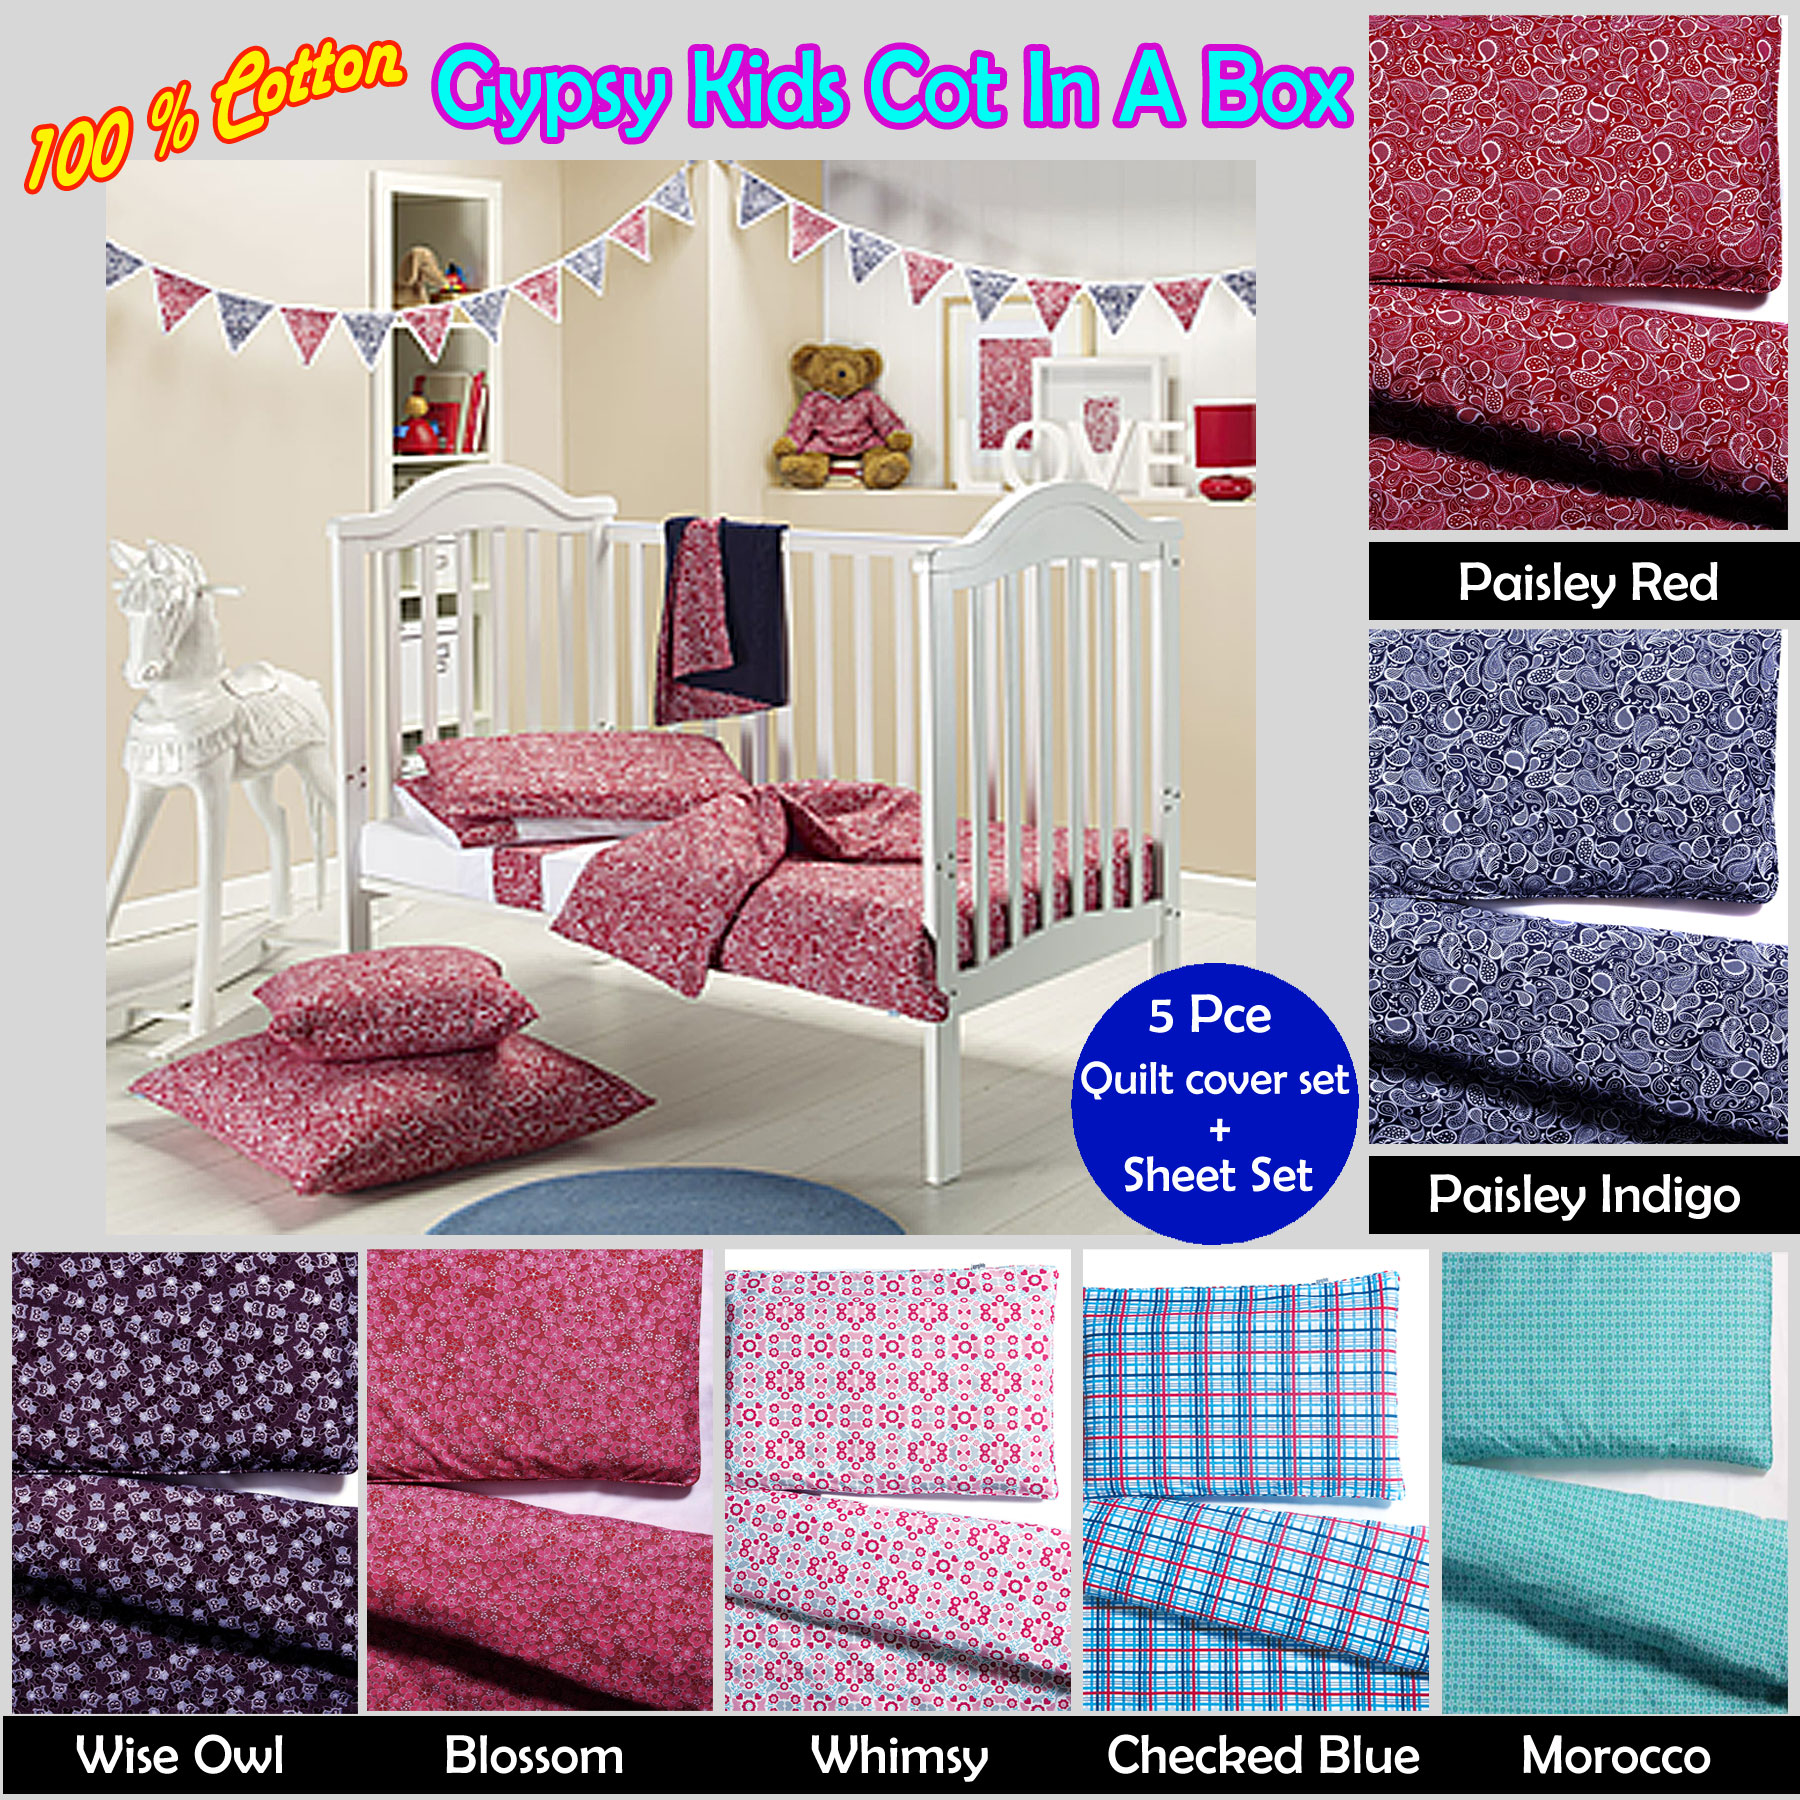 6 Pce - Gypsy Kids Cot in a Box Bedding Package 